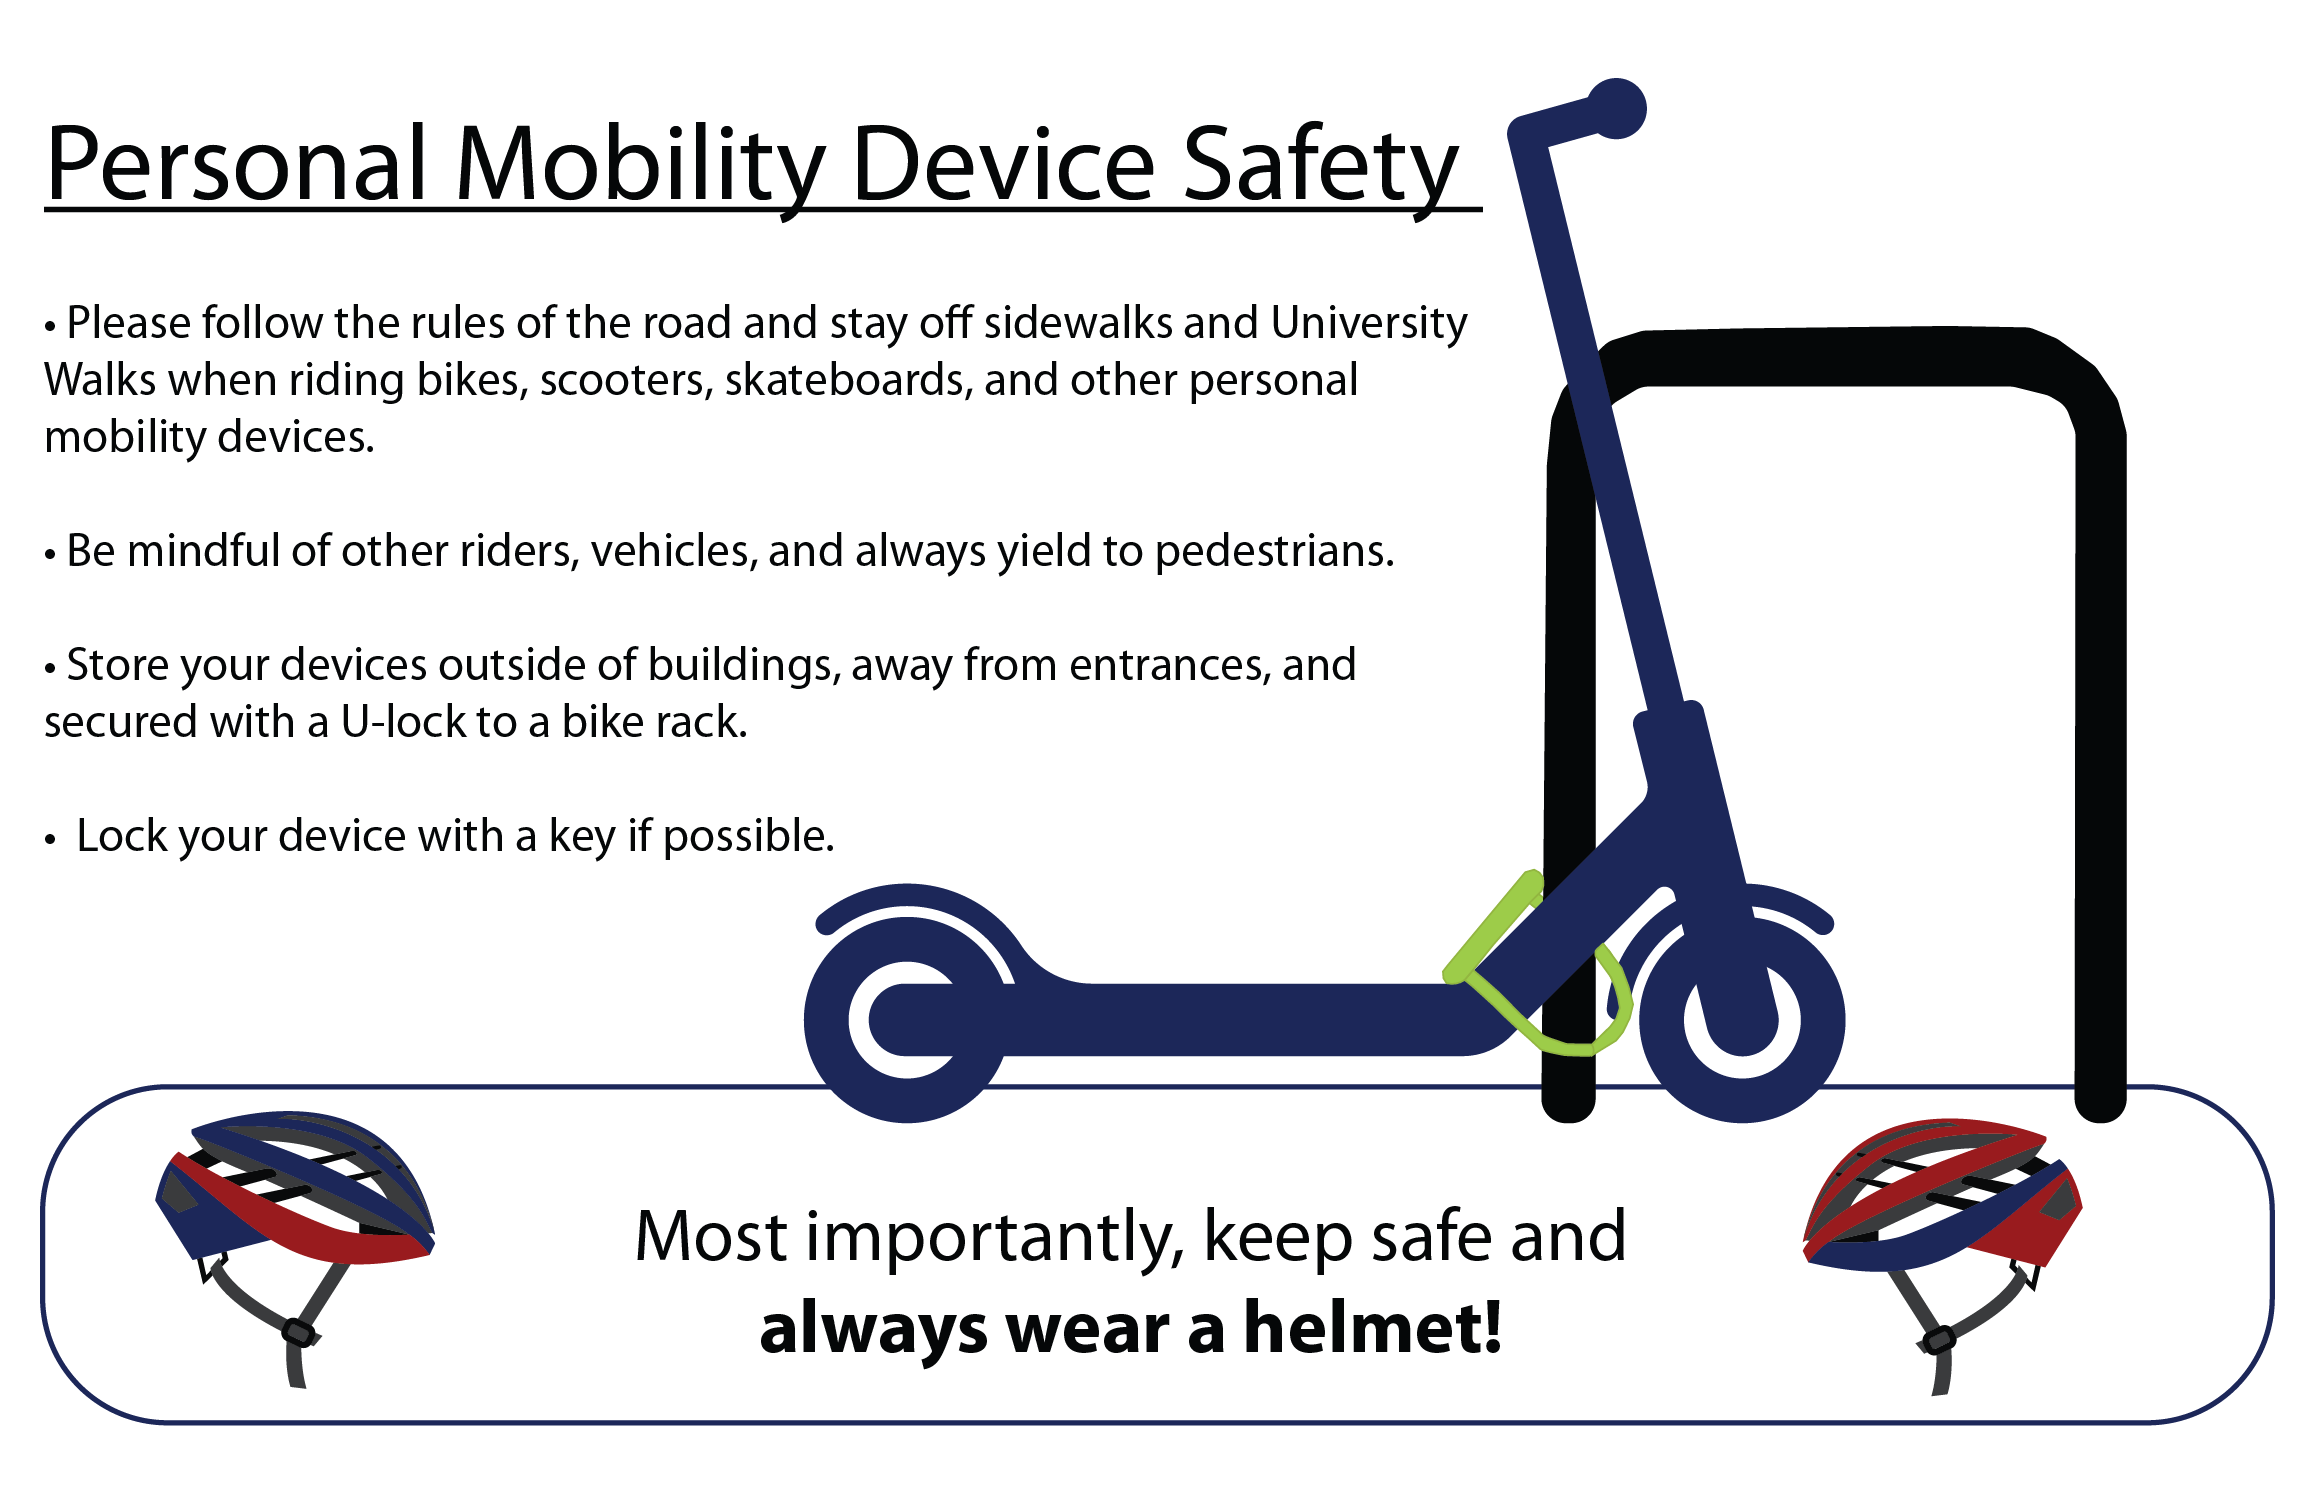 follow the rules of the road and stay off sidewalks and University Walks when riding bikes, scooters, skateboards, and other personal mobility devices.Be mindful of other riders, vehicles, and yield to pedestrians.Store your devices outside of buildings, away from entrances, and secured with a U-lock to a bike rack.  lock your device with a key.keep safe and always wear a helmet.